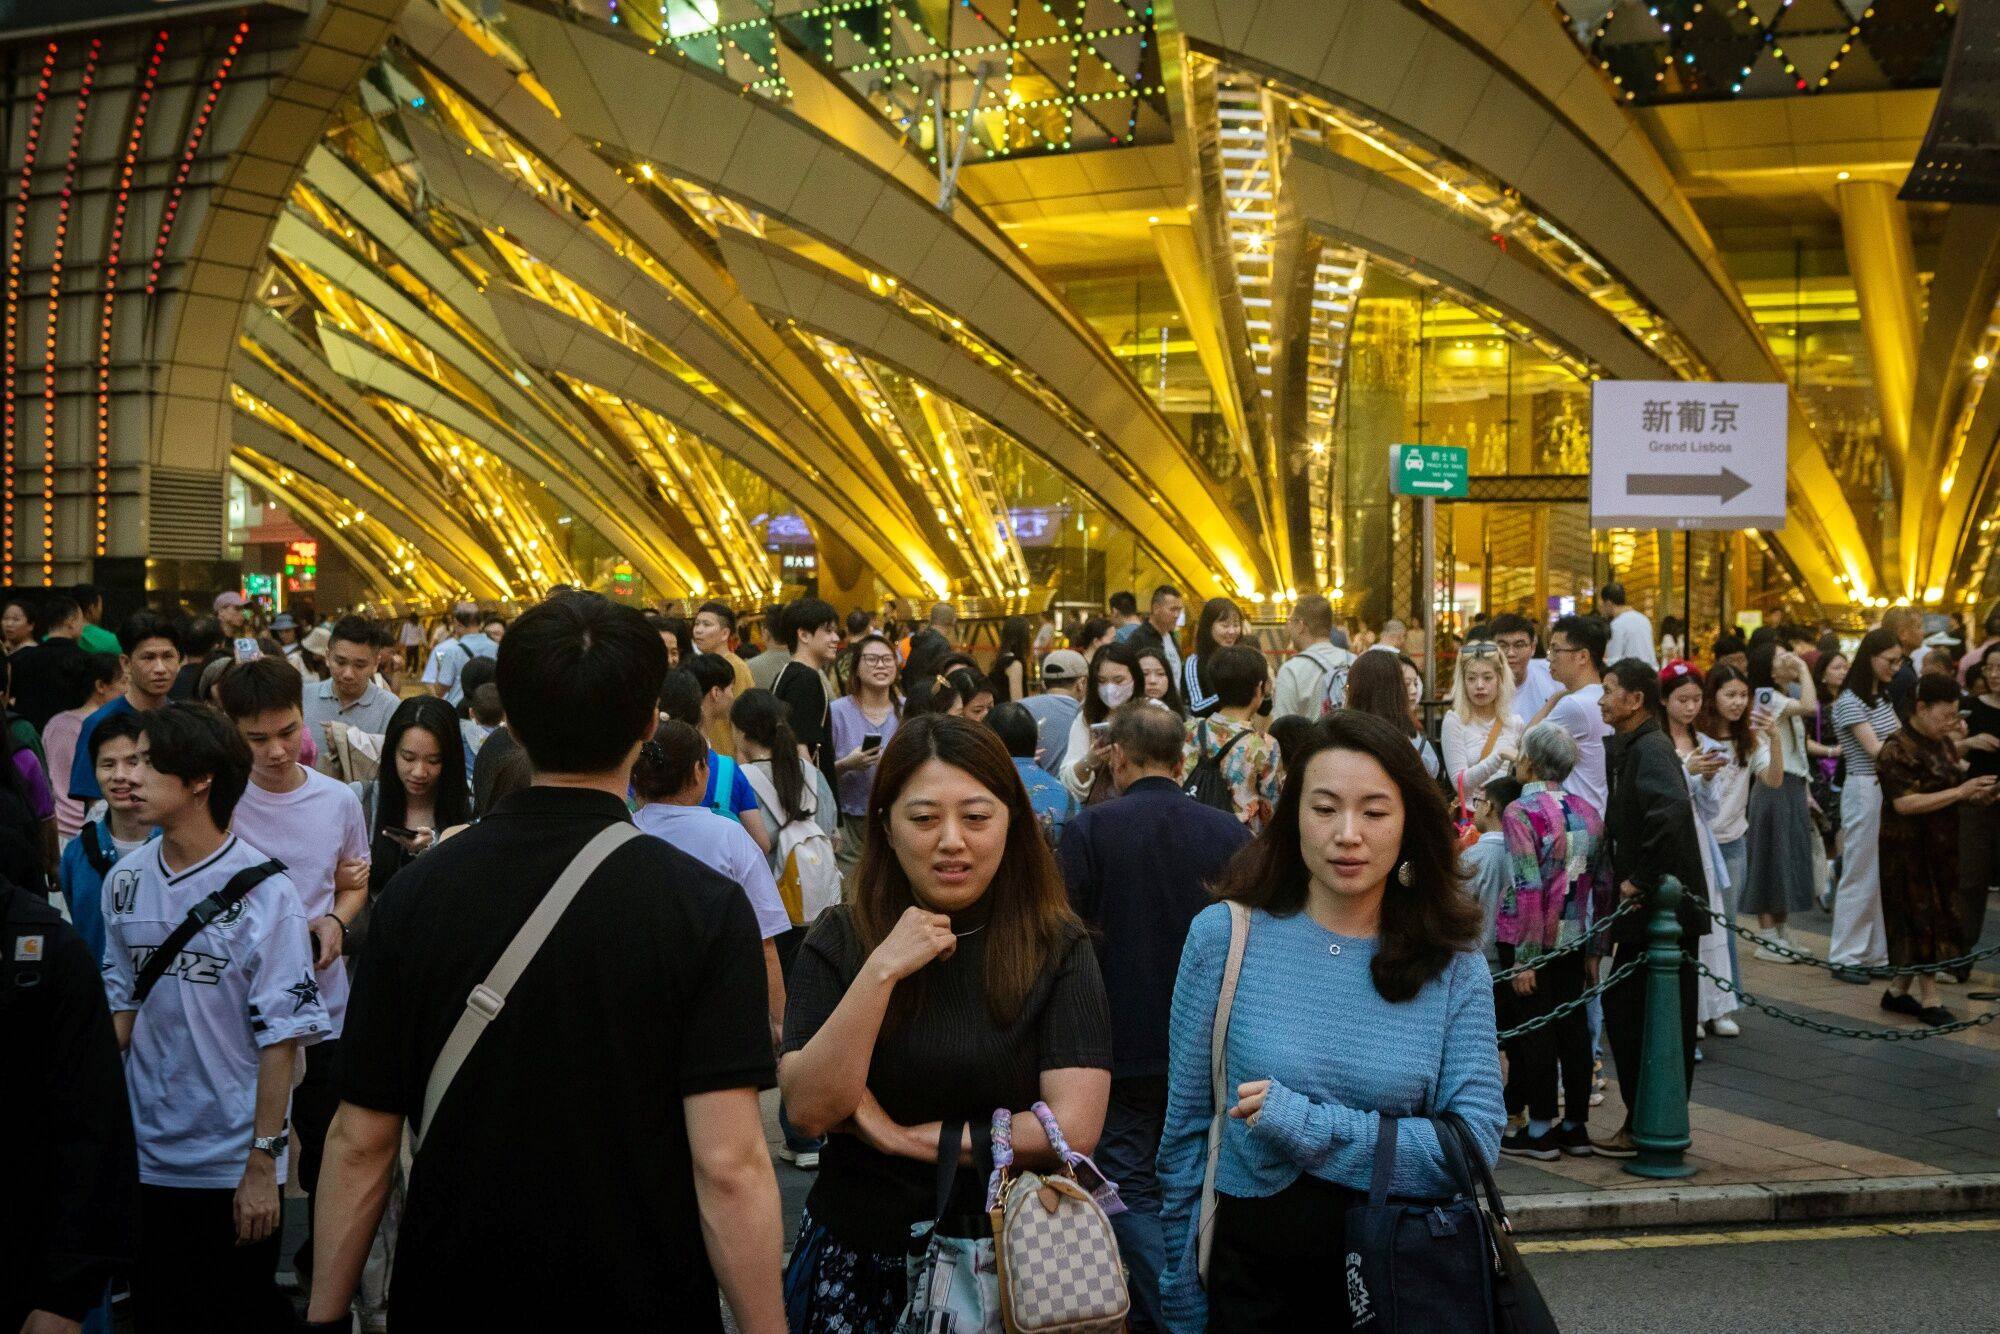 Macau’s gaming revenue last month posted its highest level since the coronavirus outbreak in February 2020. Photo: Bloomberg